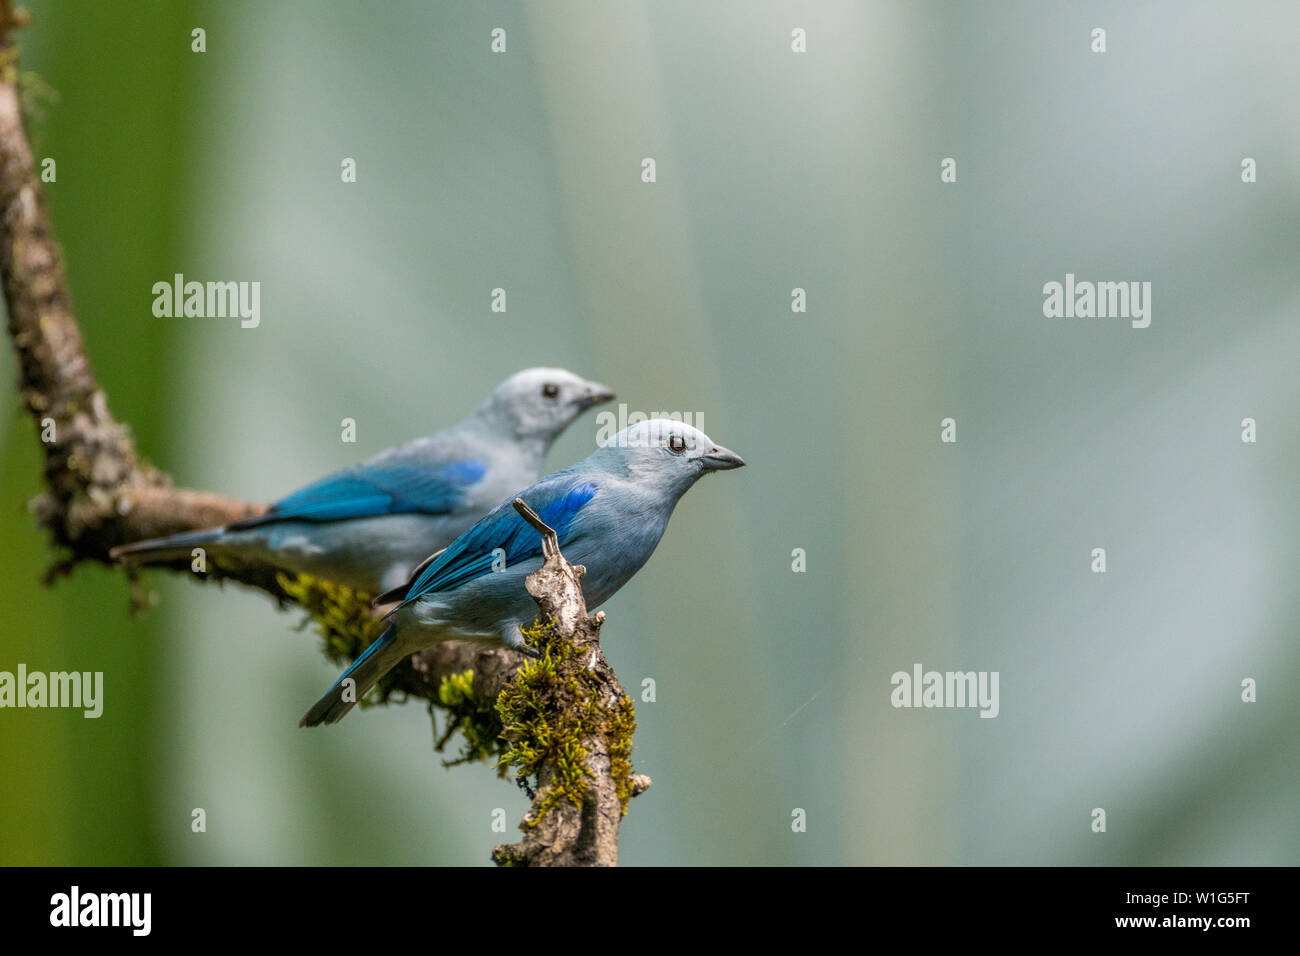 A pair of Blue-gray tanagers (Thraupis episcopus) perch on a branch in Maquenque, Costa Rica Stock Photo